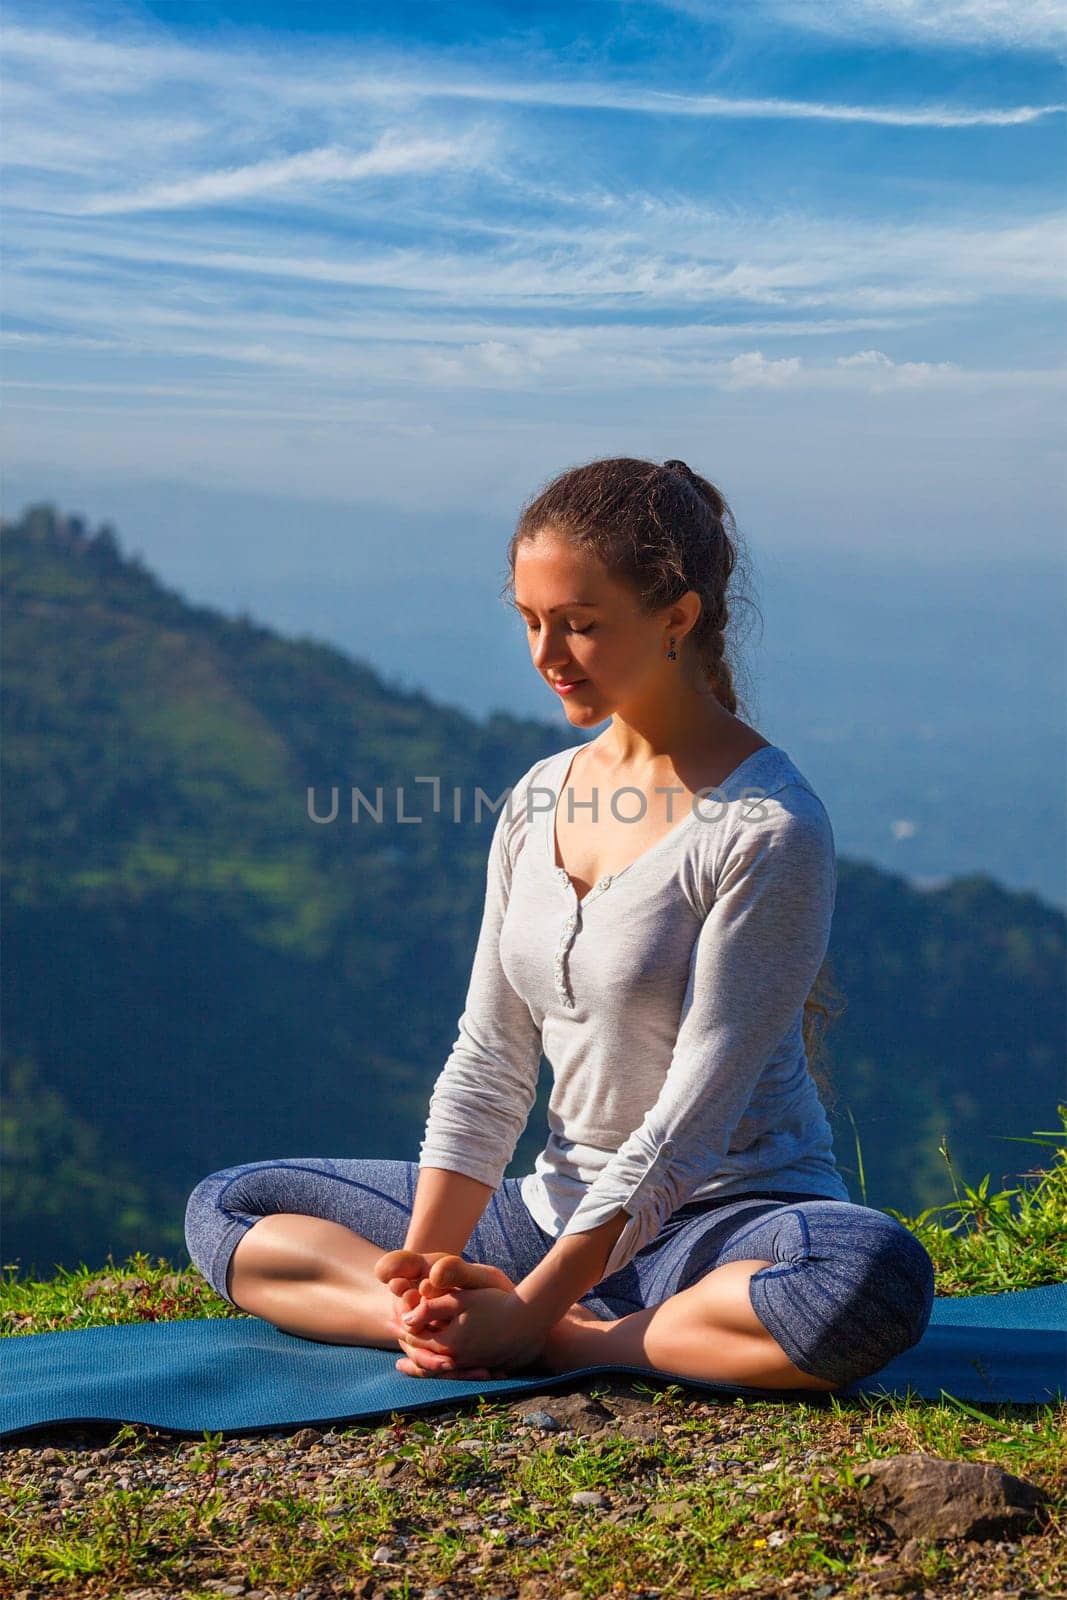 Sporty fit woman practices yoga asana Baddha Konasana - bound angle pose outdoors in HImalayas mountains in the morning with sky. Himachal Pradesh, India